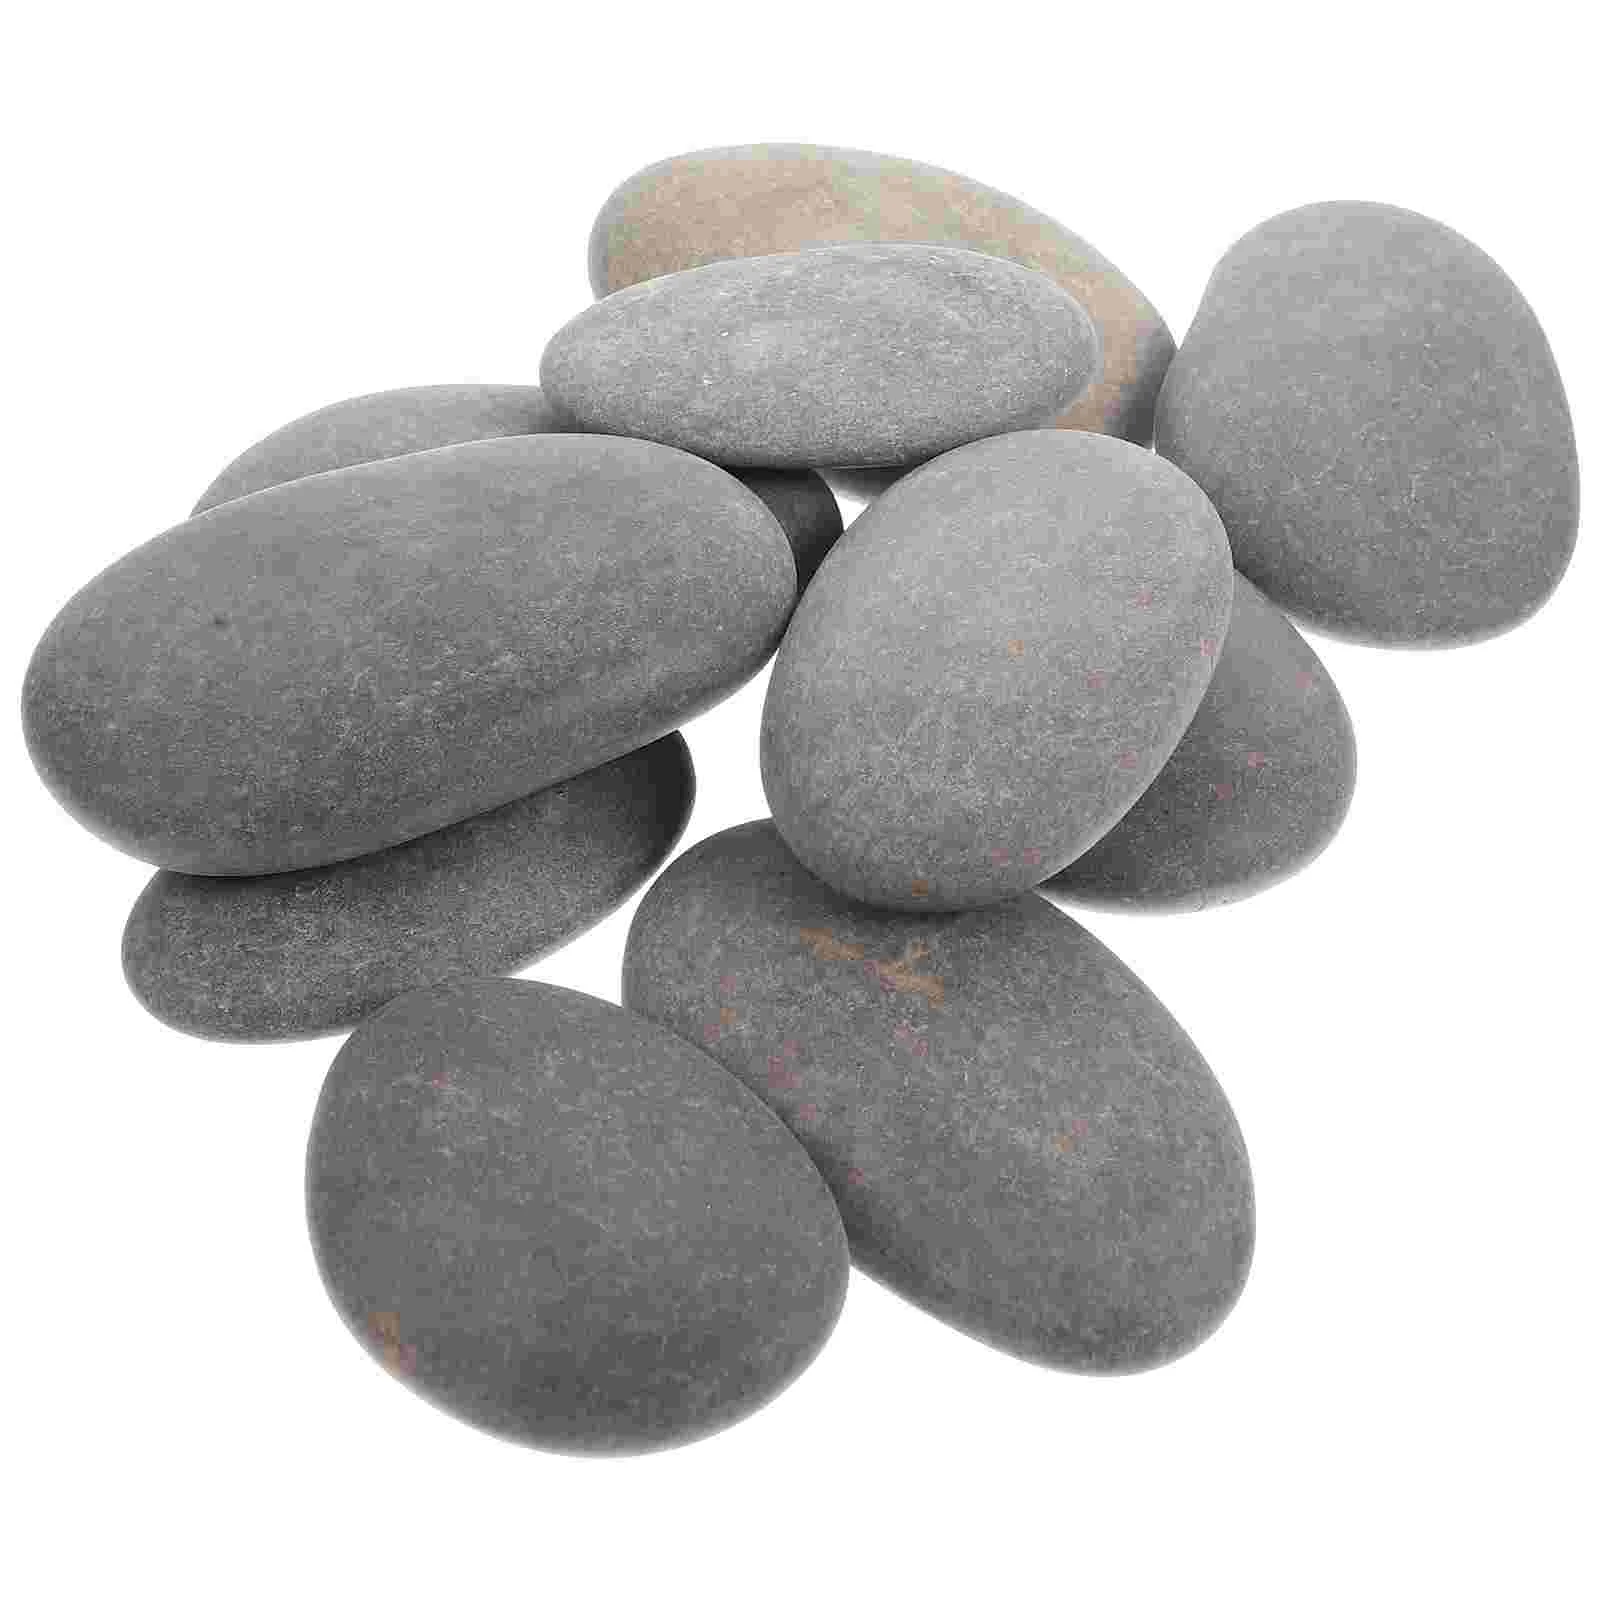 

10 Pcs Creative Painting Stone Multi-function Drawing Rocks Painted Flat Stones for Crafts Kids DIY Smooth Multifunction Child